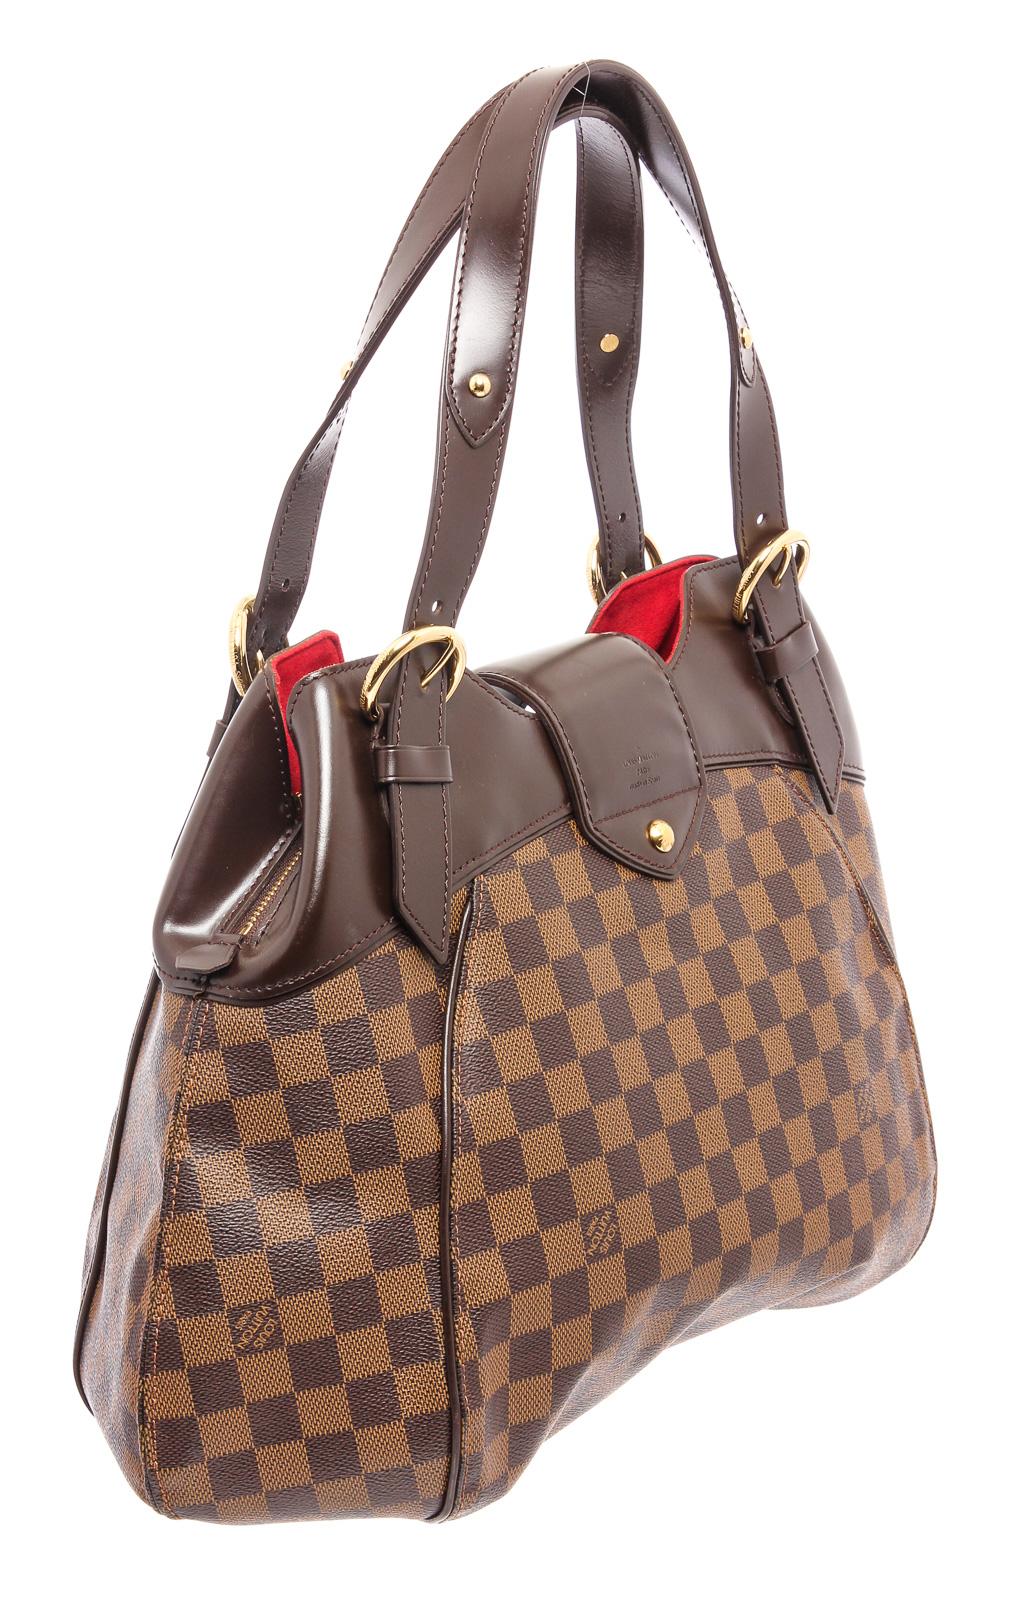 Damier Ebene Louis Vuitton Sistina PM with brass hardware, moka leather trim, dual adjustable flat shoulder straps, red Alcantara lining, dual interior slip pockets and two-way zip closures at top with logo-embossed push-lock closure at front flap.